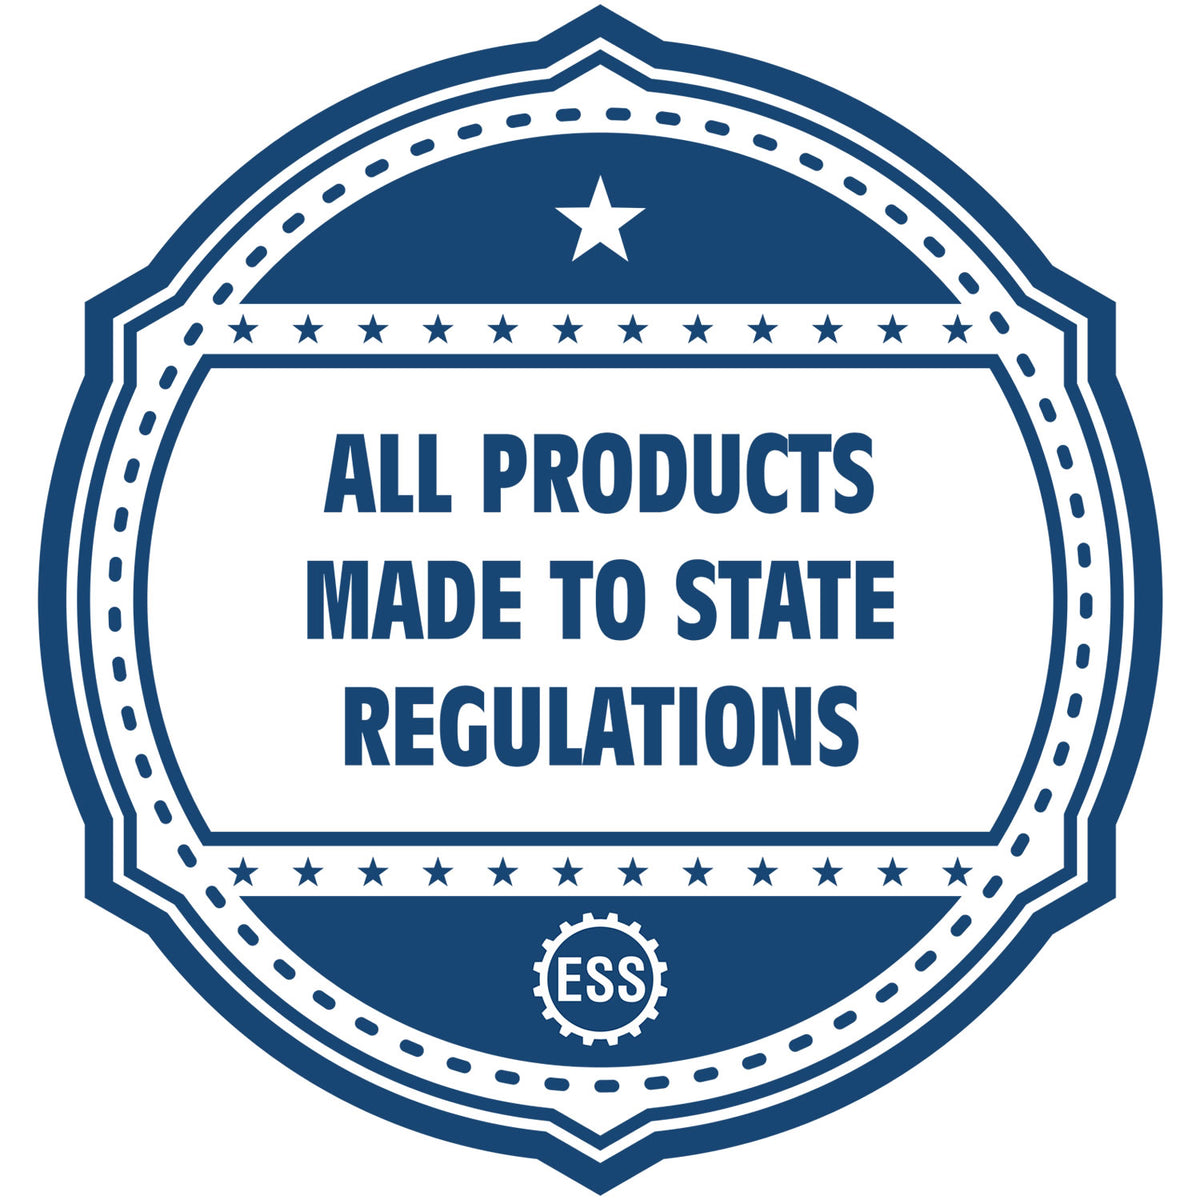 An icon or badge element for the Digital New Jersey PE Stamp and Electronic Seal for New Jersey Engineer showing that this product is made in compliance with state regulations.